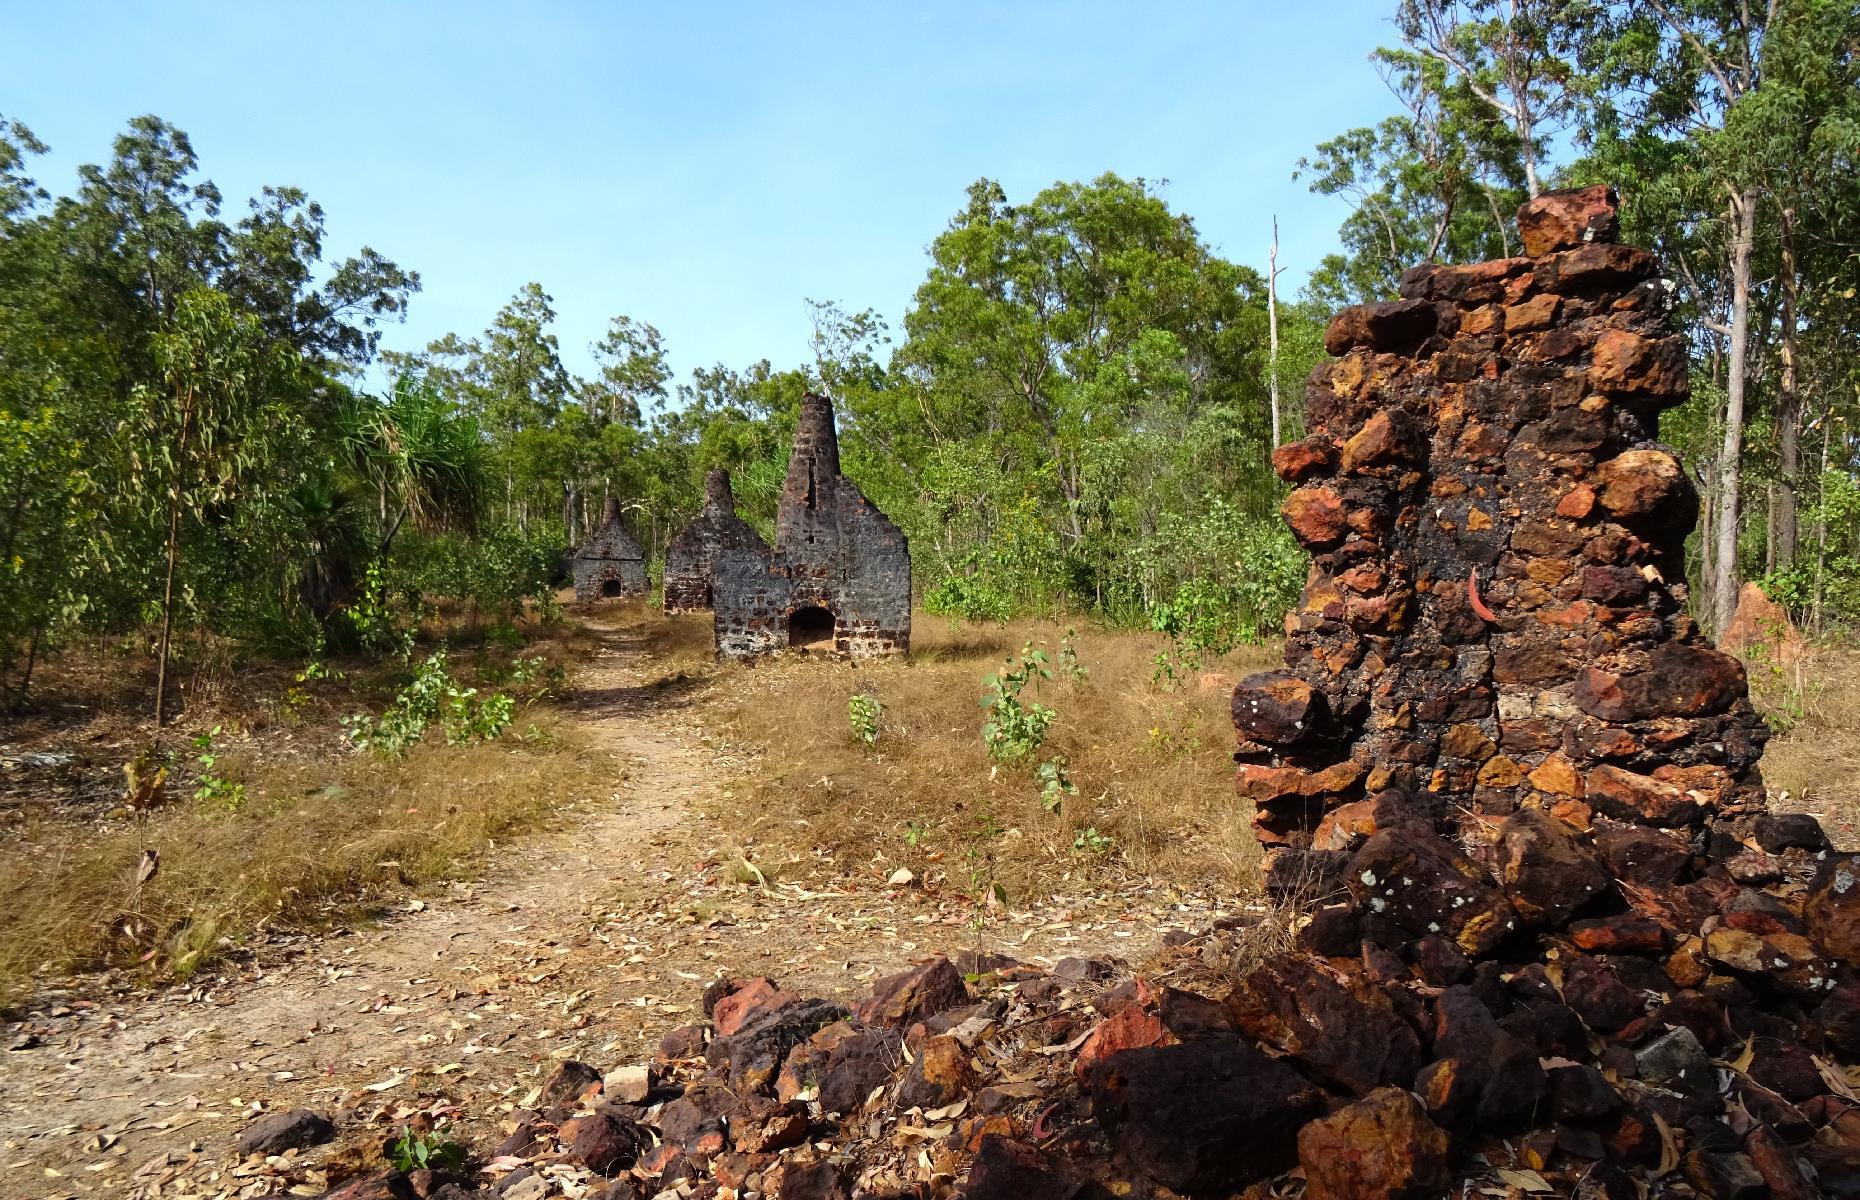 <p>The remote ruins of an ill-fated British settlement can be found in Garig Gunak Barlu National Park on the Cobourg Peninsula. They are the remains of a third endeavor to settle the area in Arnhem Land. It was named Victoria by the British soldiers who came to this isolated area with their families in 1838. They spent 11 years attempting to establish a settlement – for both defensive and trading reasons – but were eventually driven out in 1849 by disease and numerous deaths.</p>